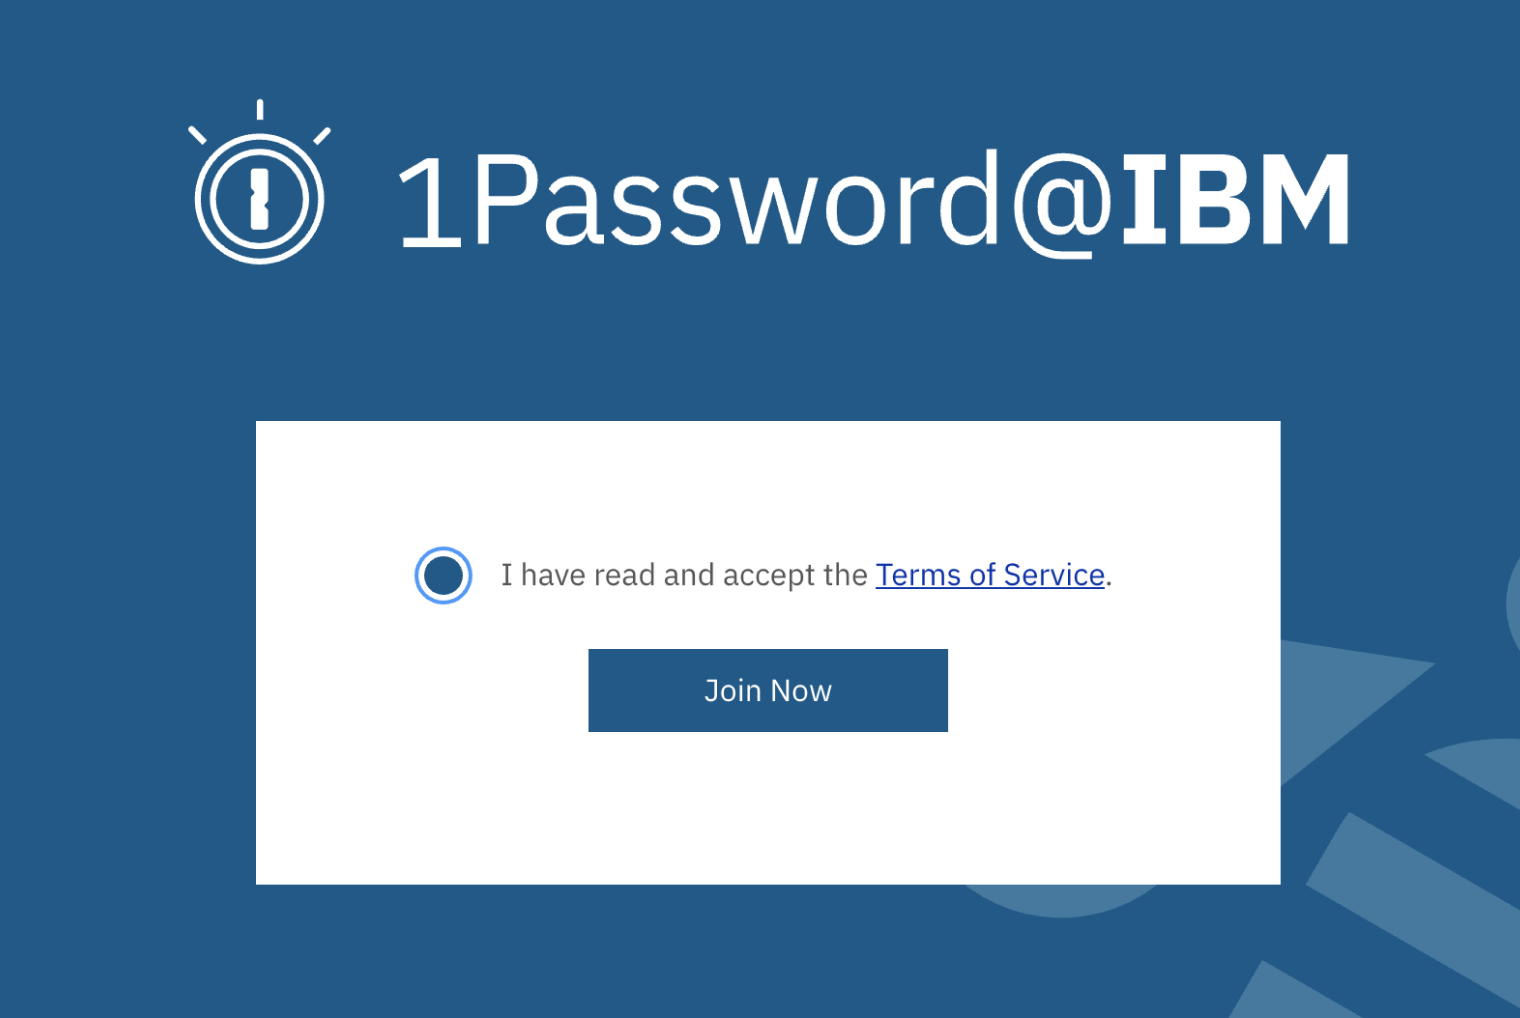 IBM sign-up screen for 1Password